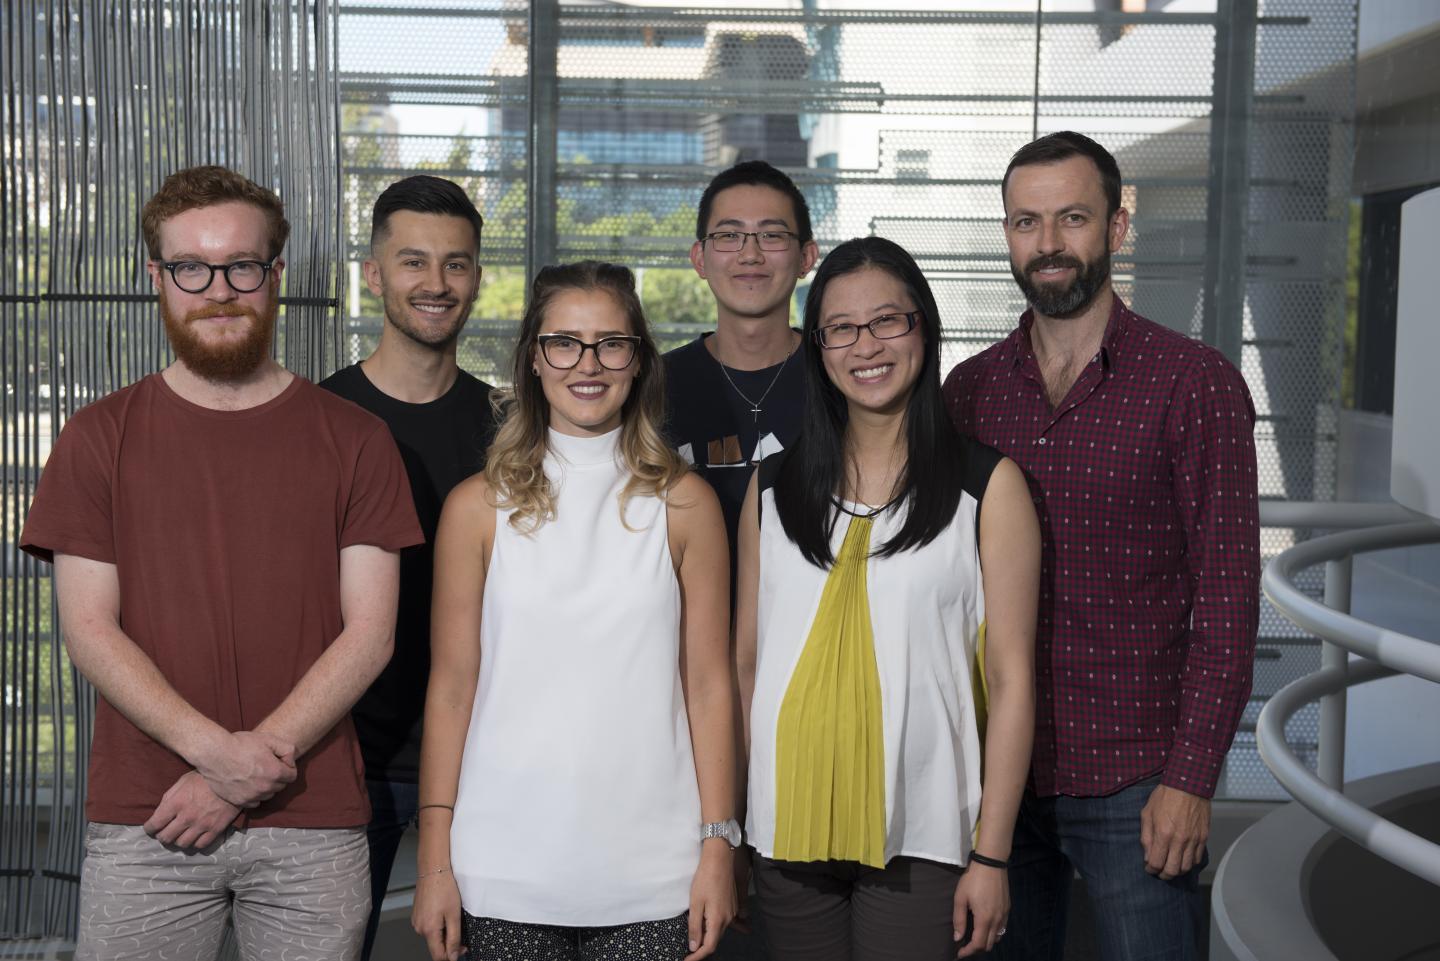 The Melbourne Team of Researchers Led by Dr. Nick Huntington.